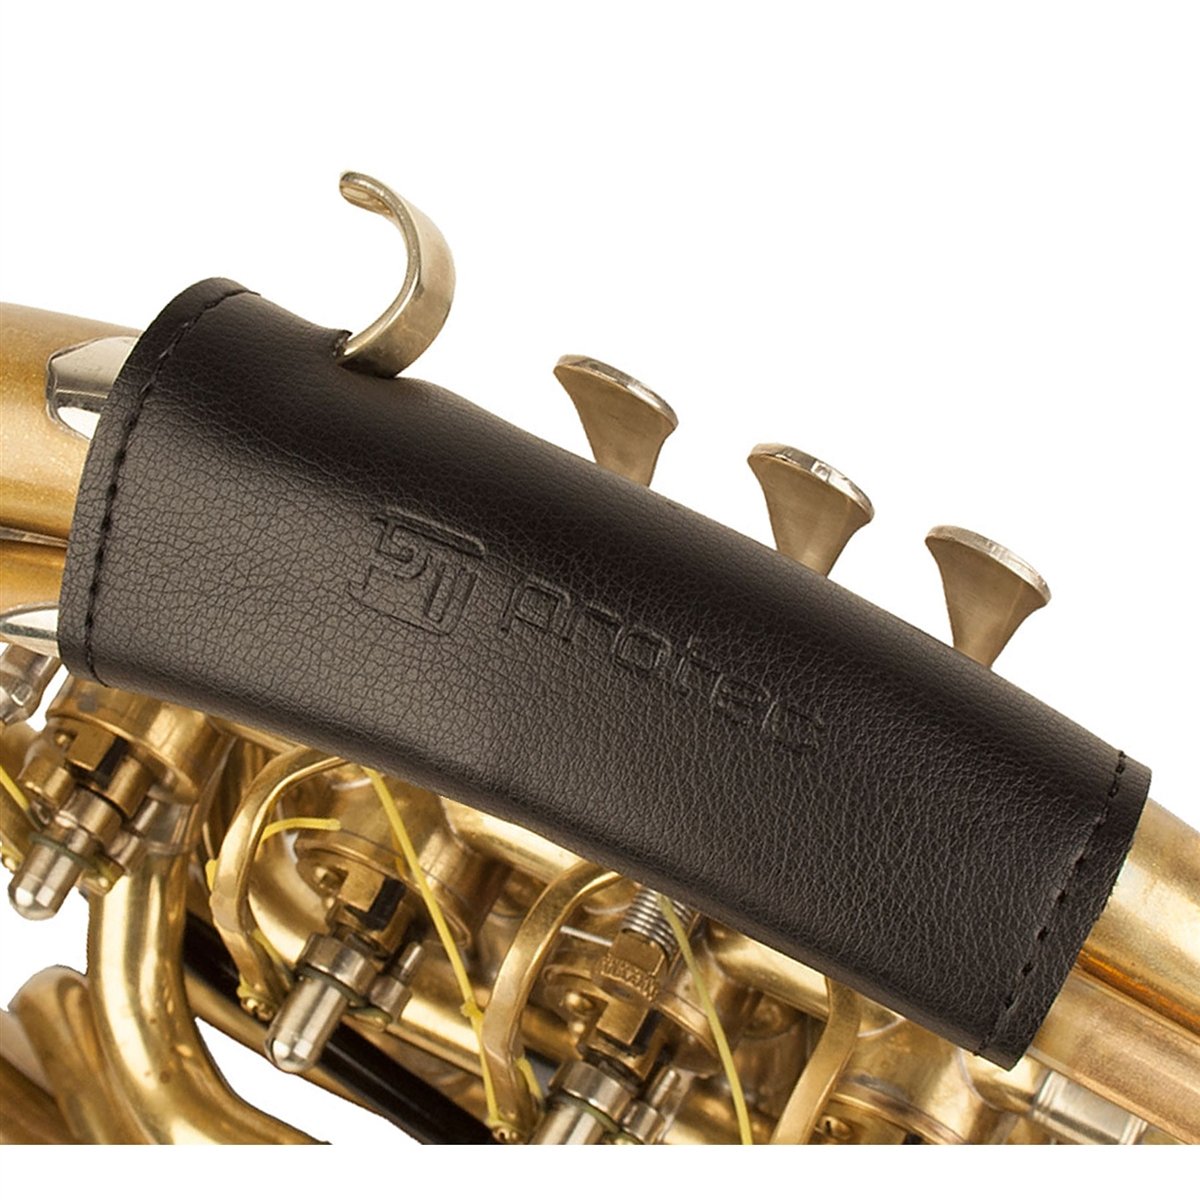 Protec - Leather Hand Guard (Small) for French Horn-Accessories-Protec-Music Elements